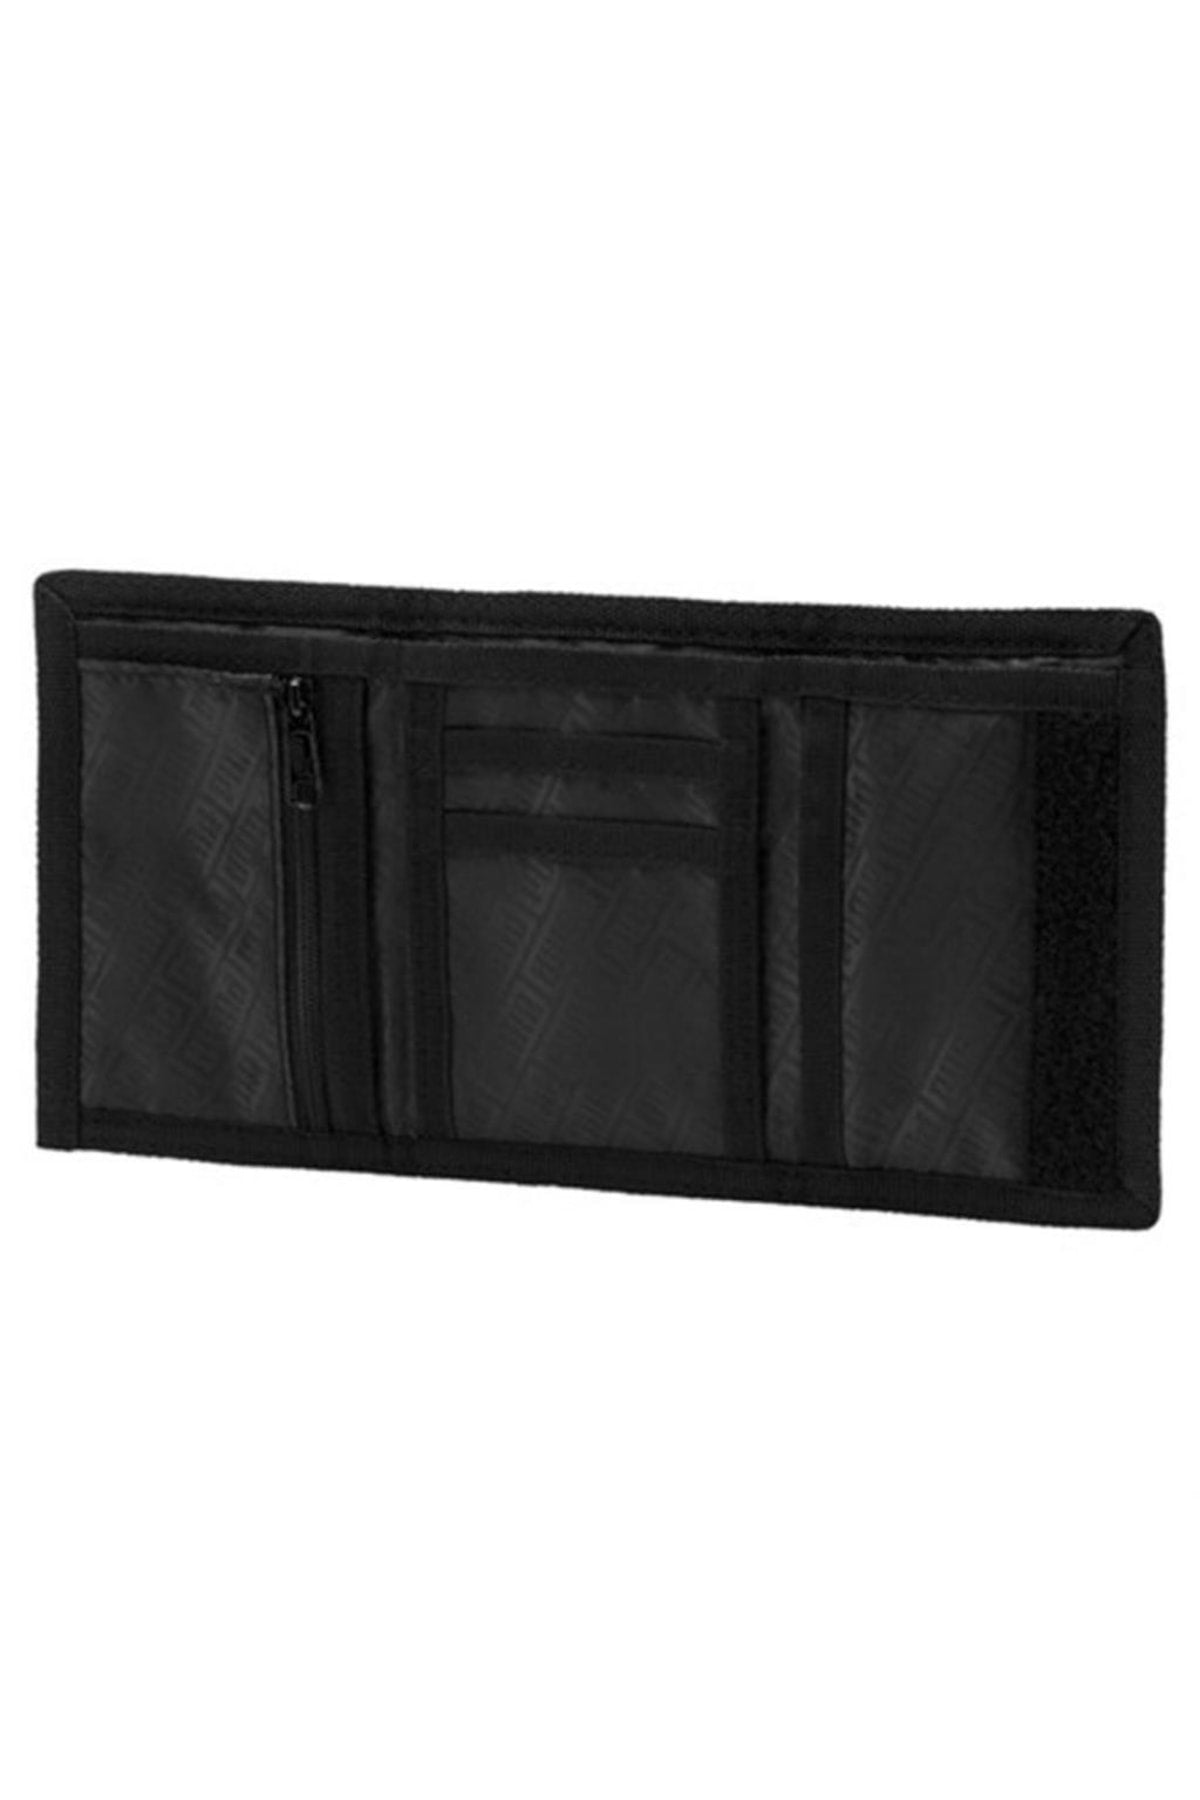 Phase Unisex Black Casual Style Wallet 07561701